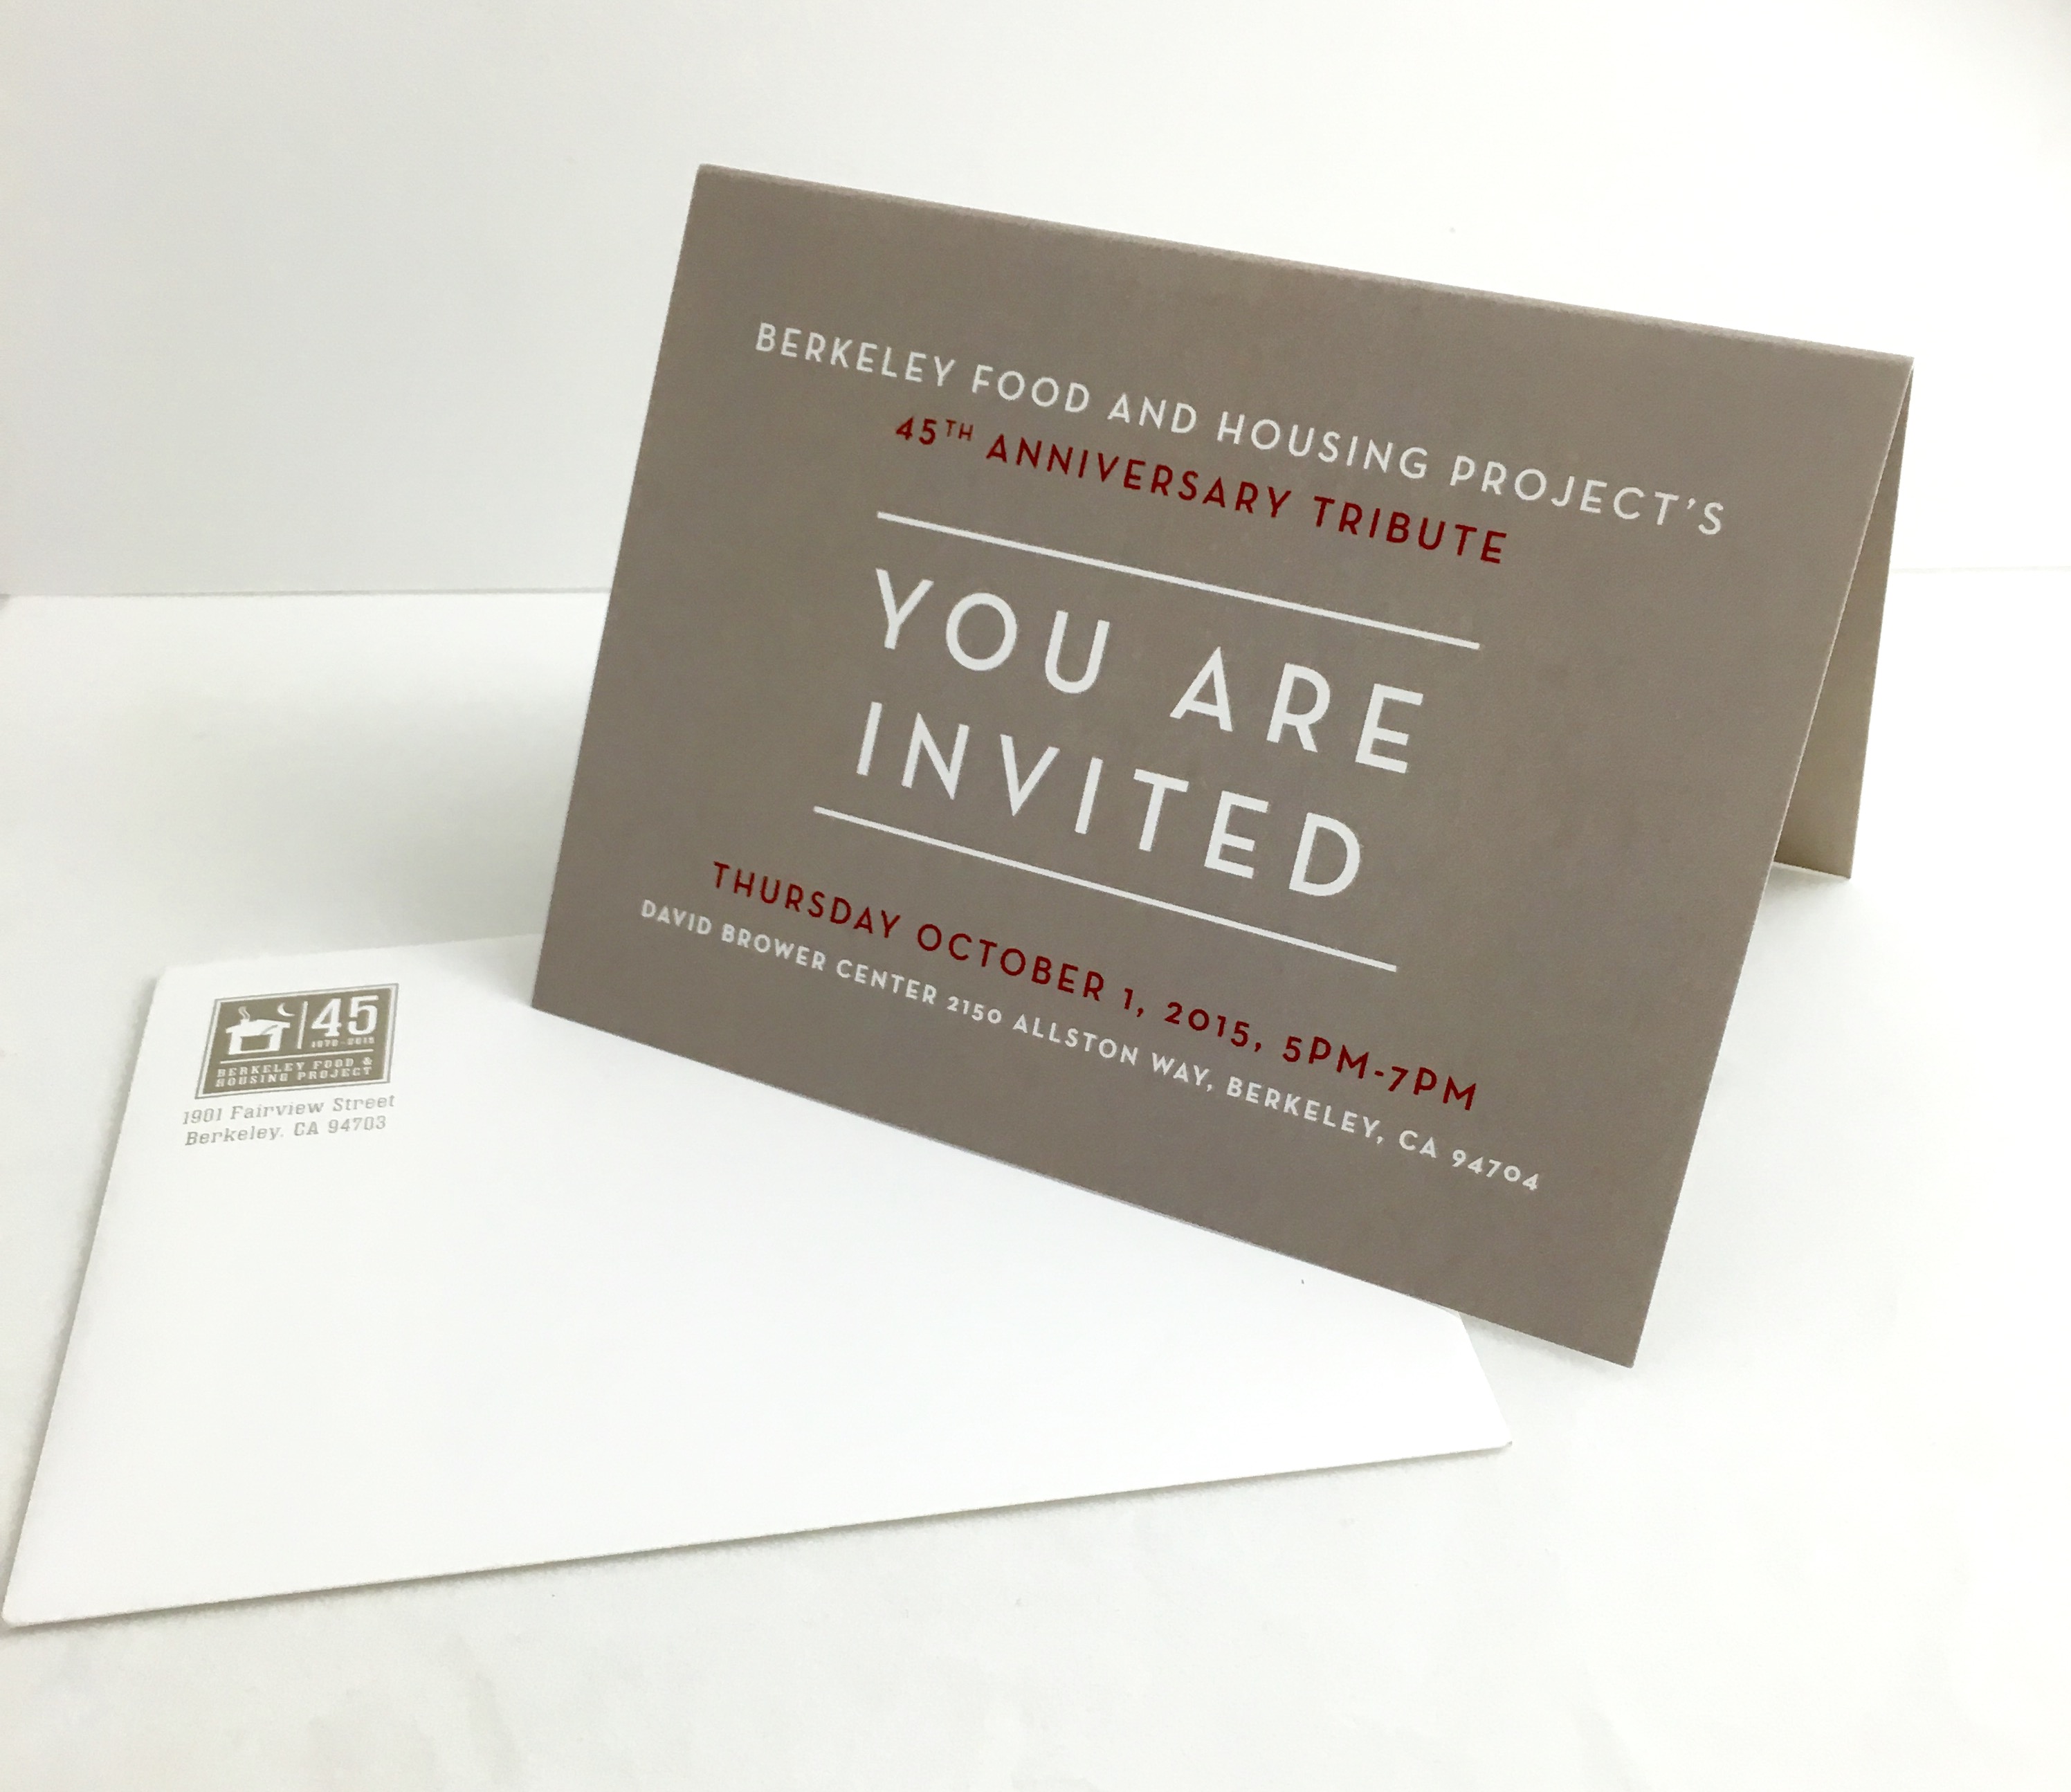 Berkeley Food and Housing Project's gala invite design